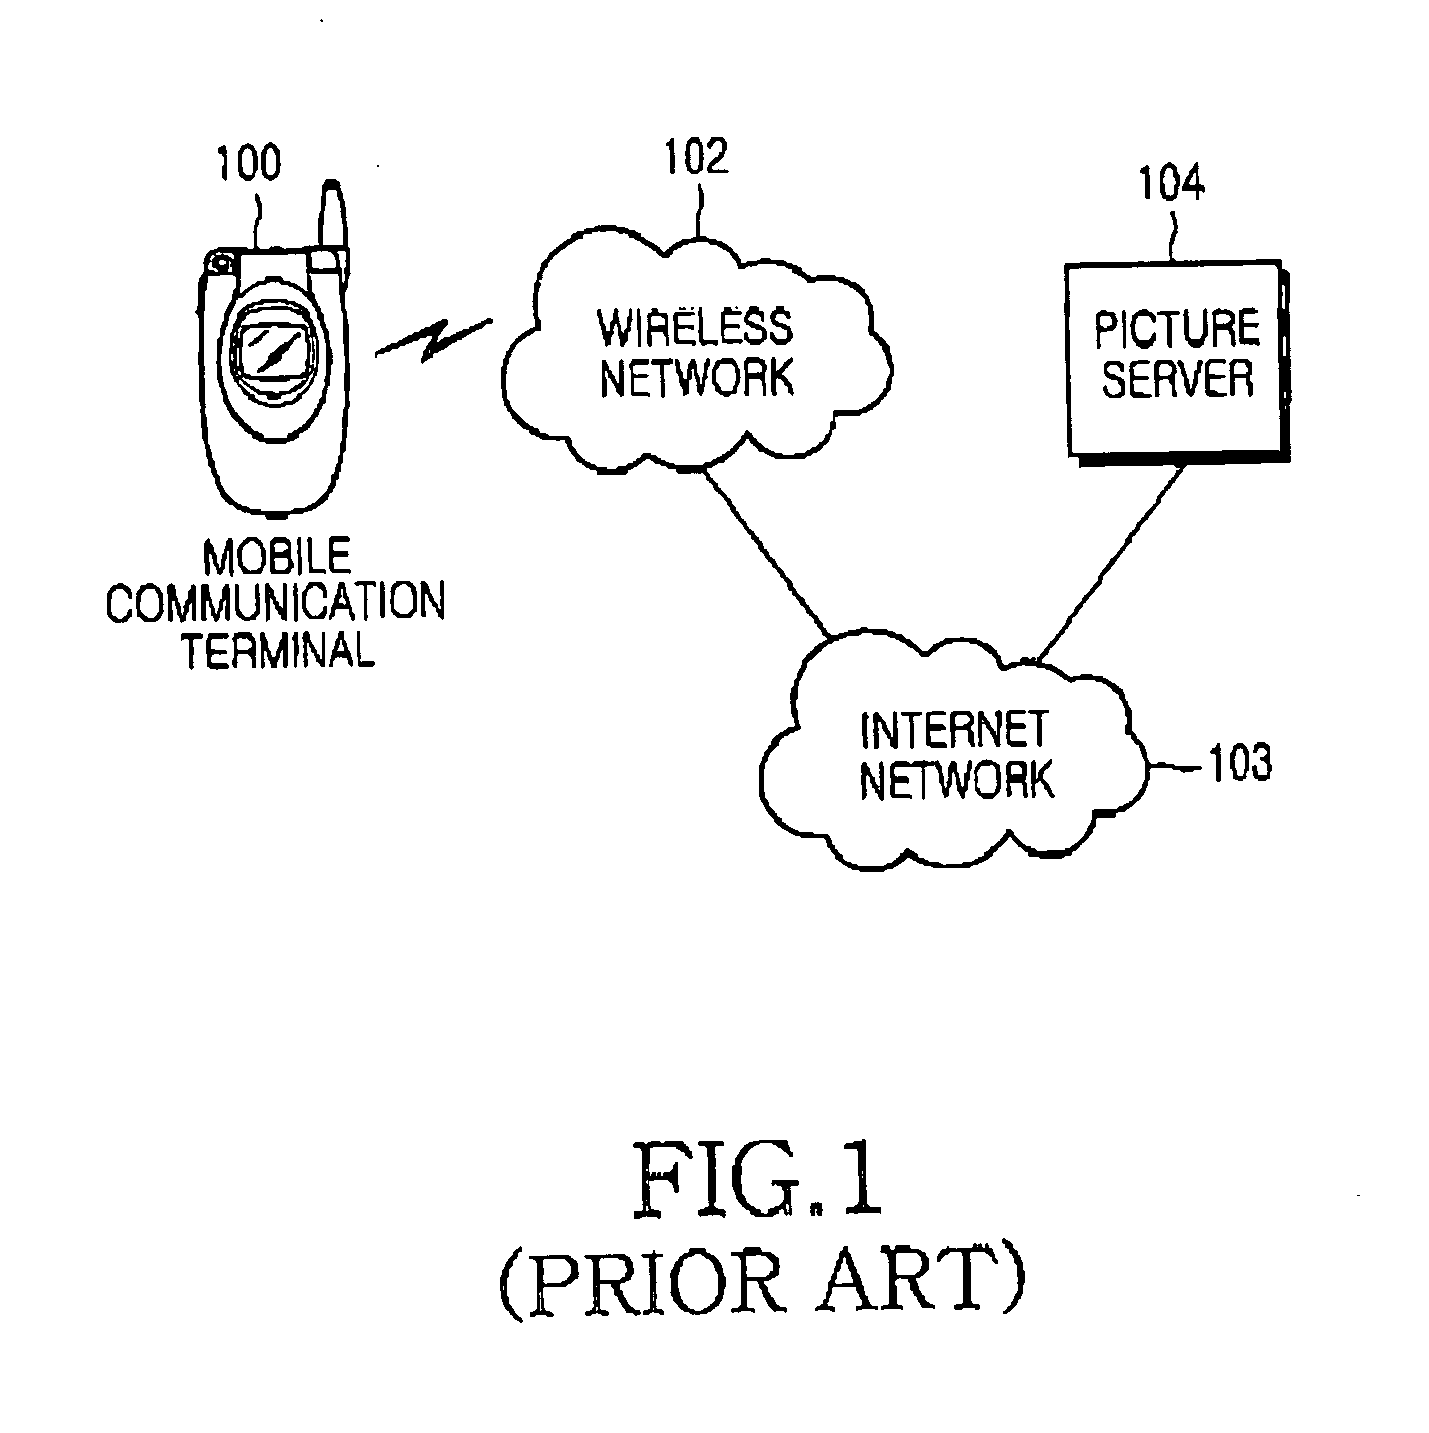 Picture downloading apparatus and method